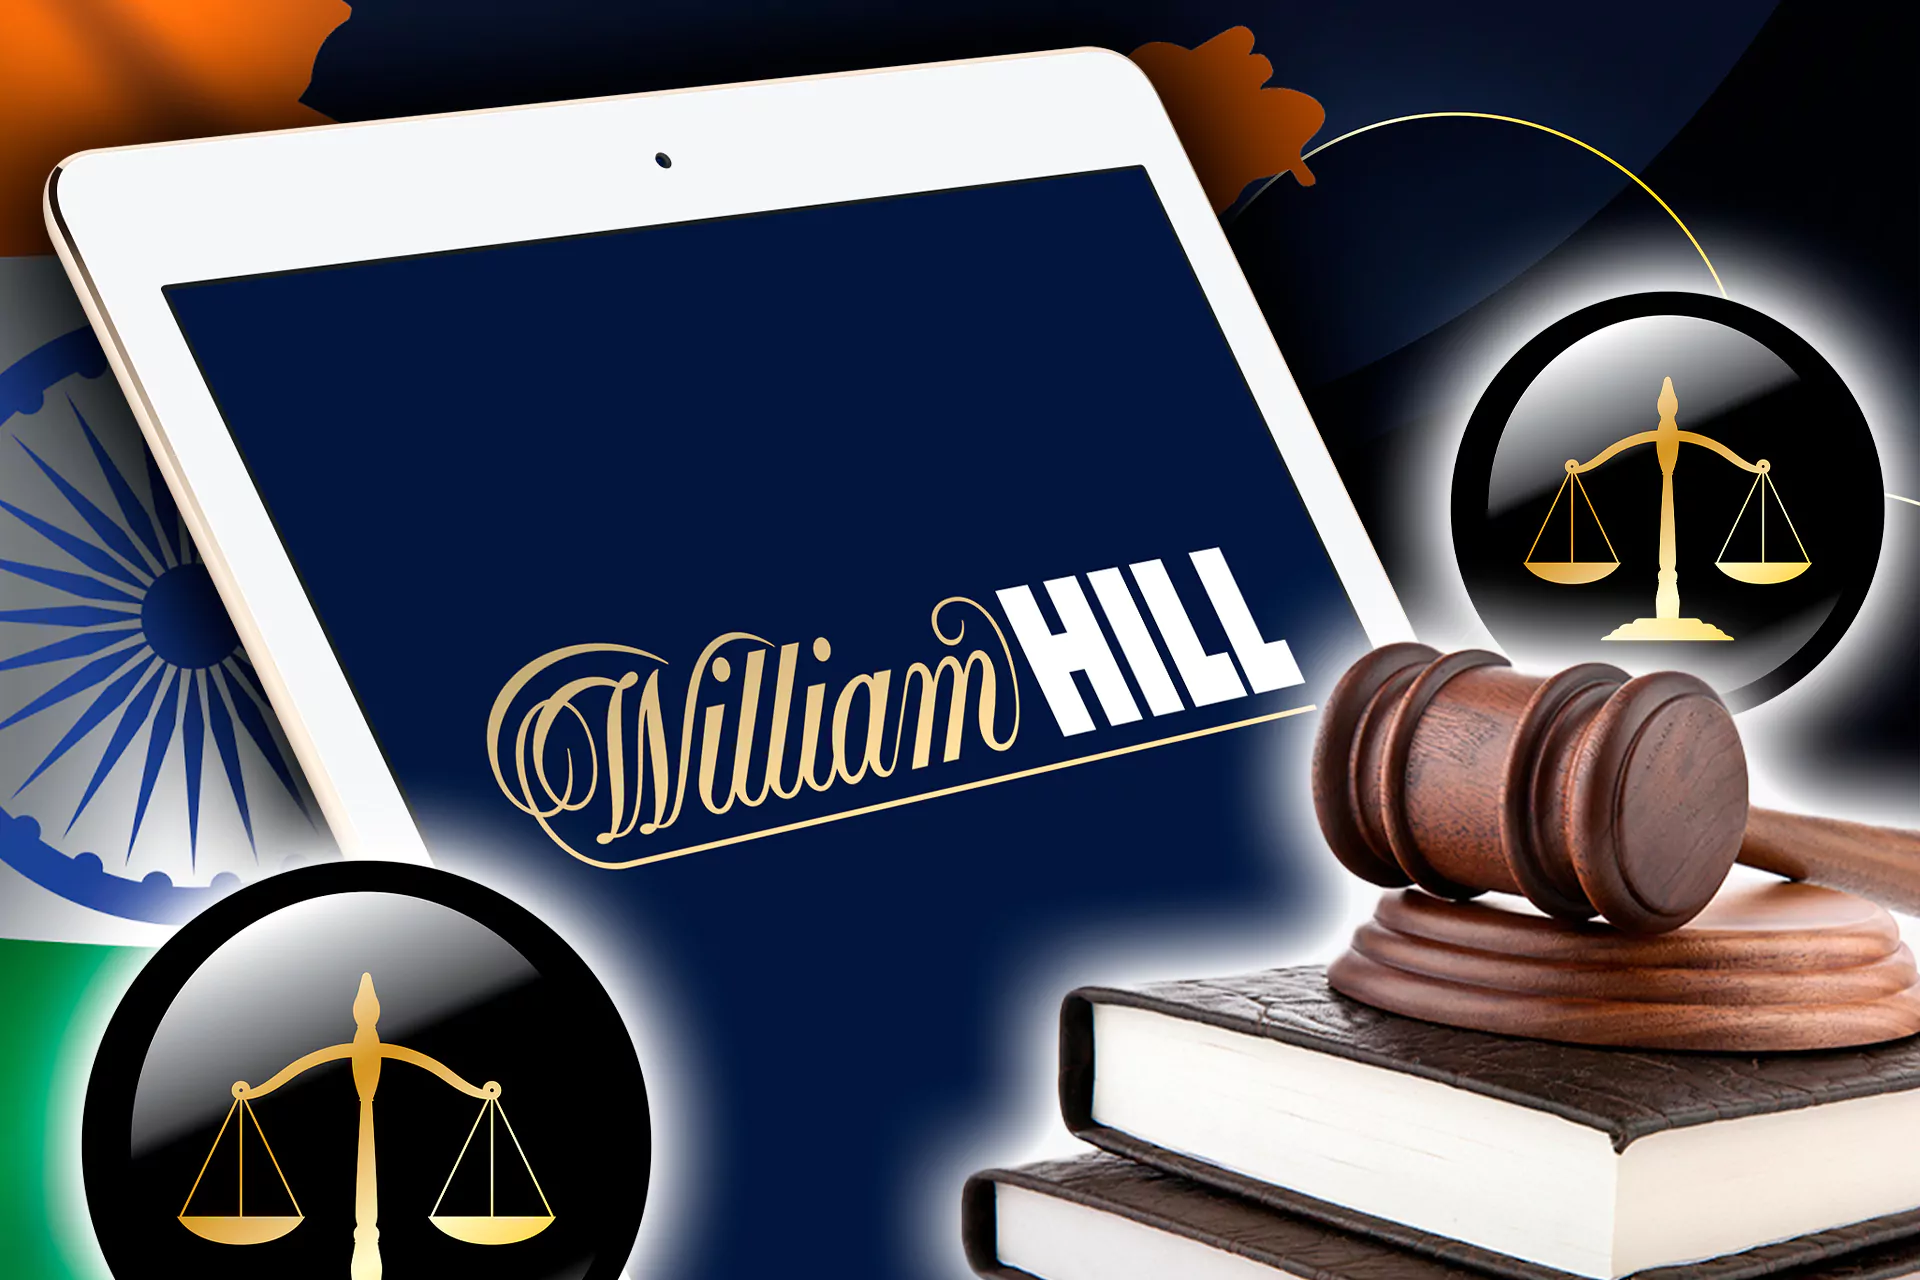 William Hill is a legal bookmaker operating in India.